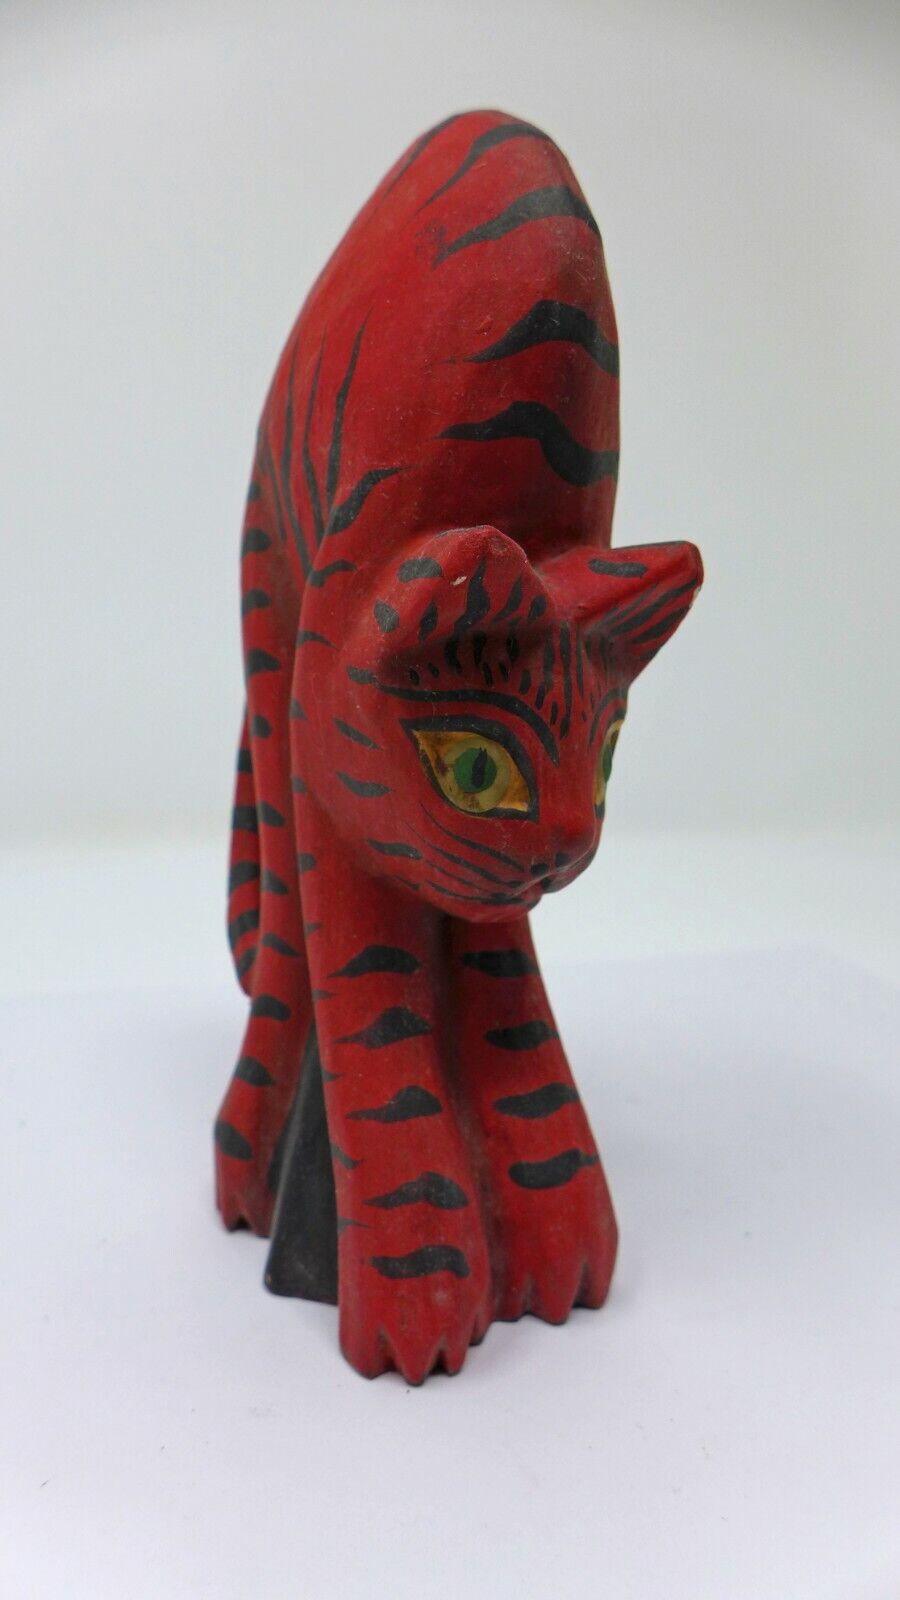 Indonesian / Balinese Handcrafted Small Wooden Red Striped Cat Arching Statue